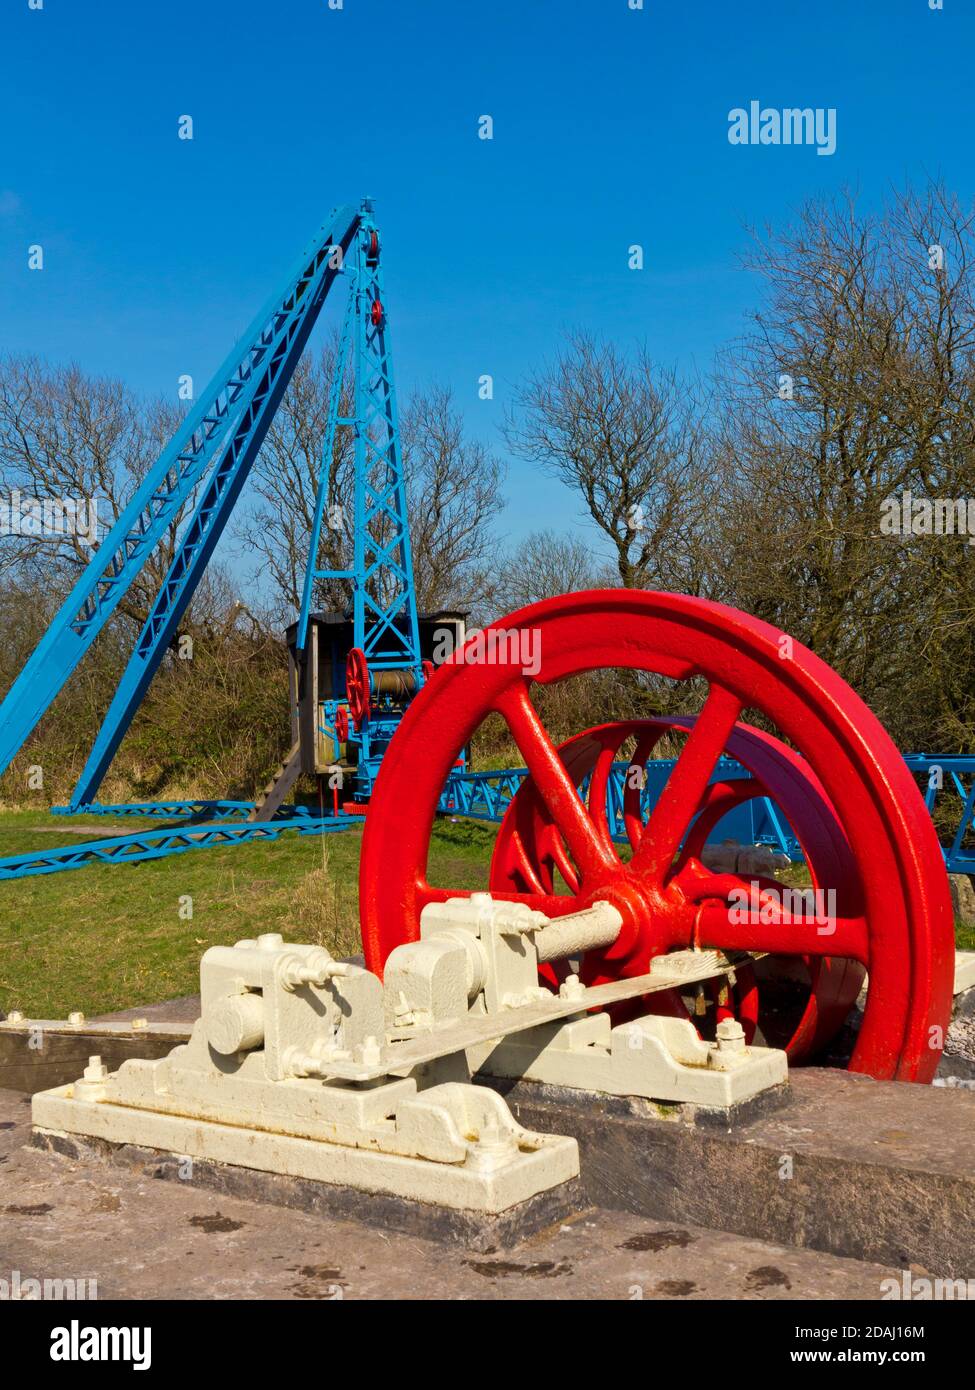 Old quarrying equipment on display at Teggs Nose Country Park near Macclesfield in East Cheshire England UK Stock Photo